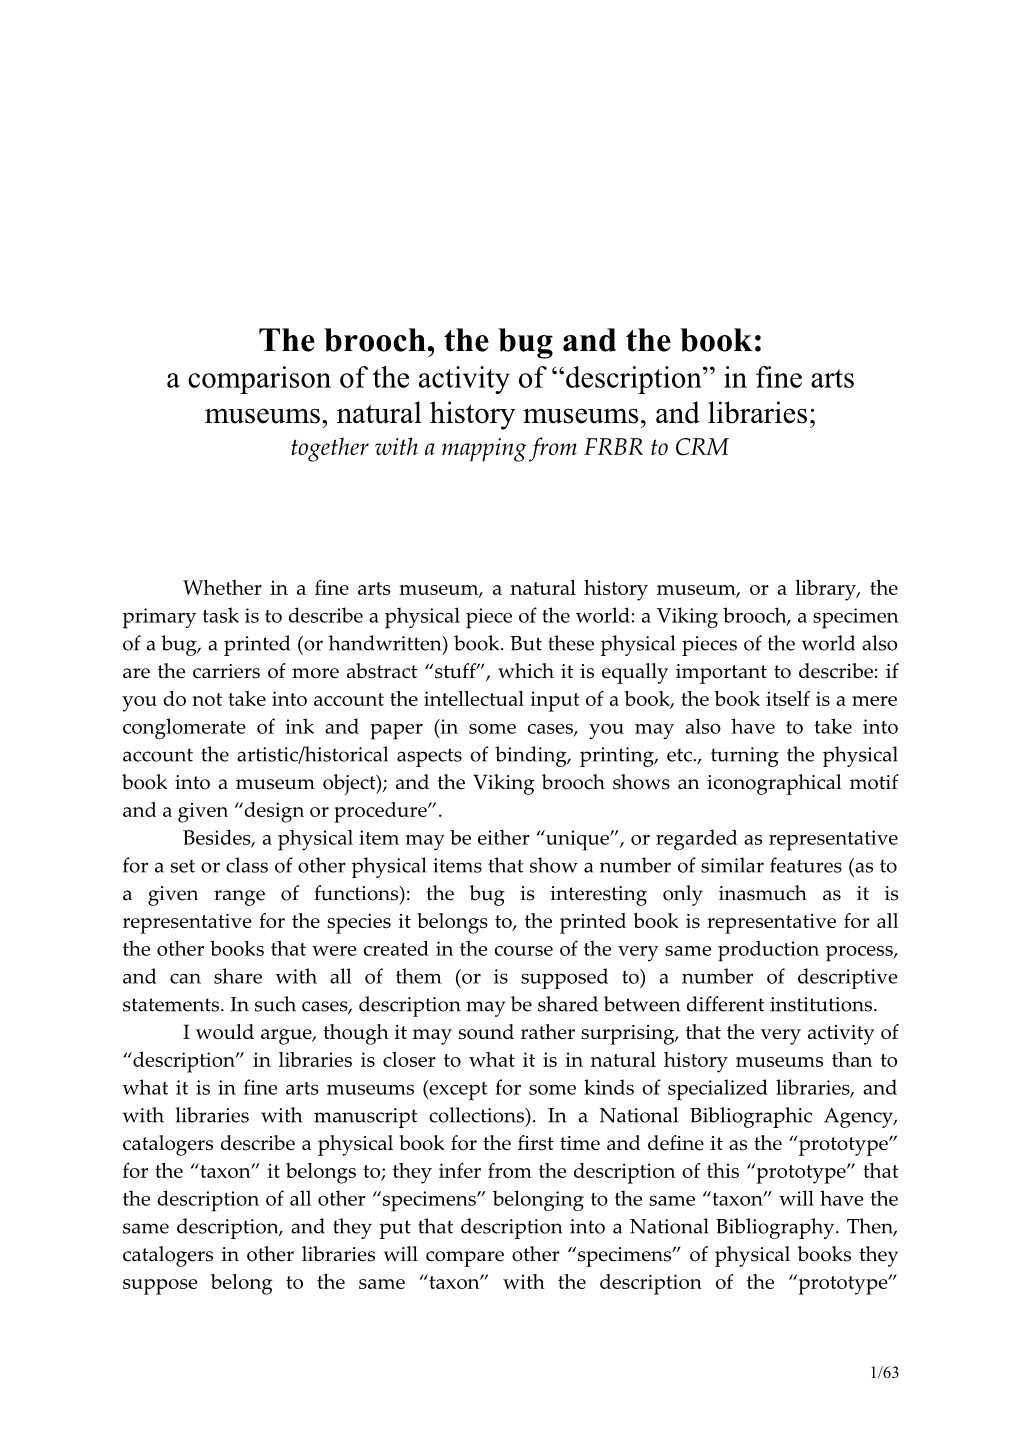 The Brooch, the Bug and the Book